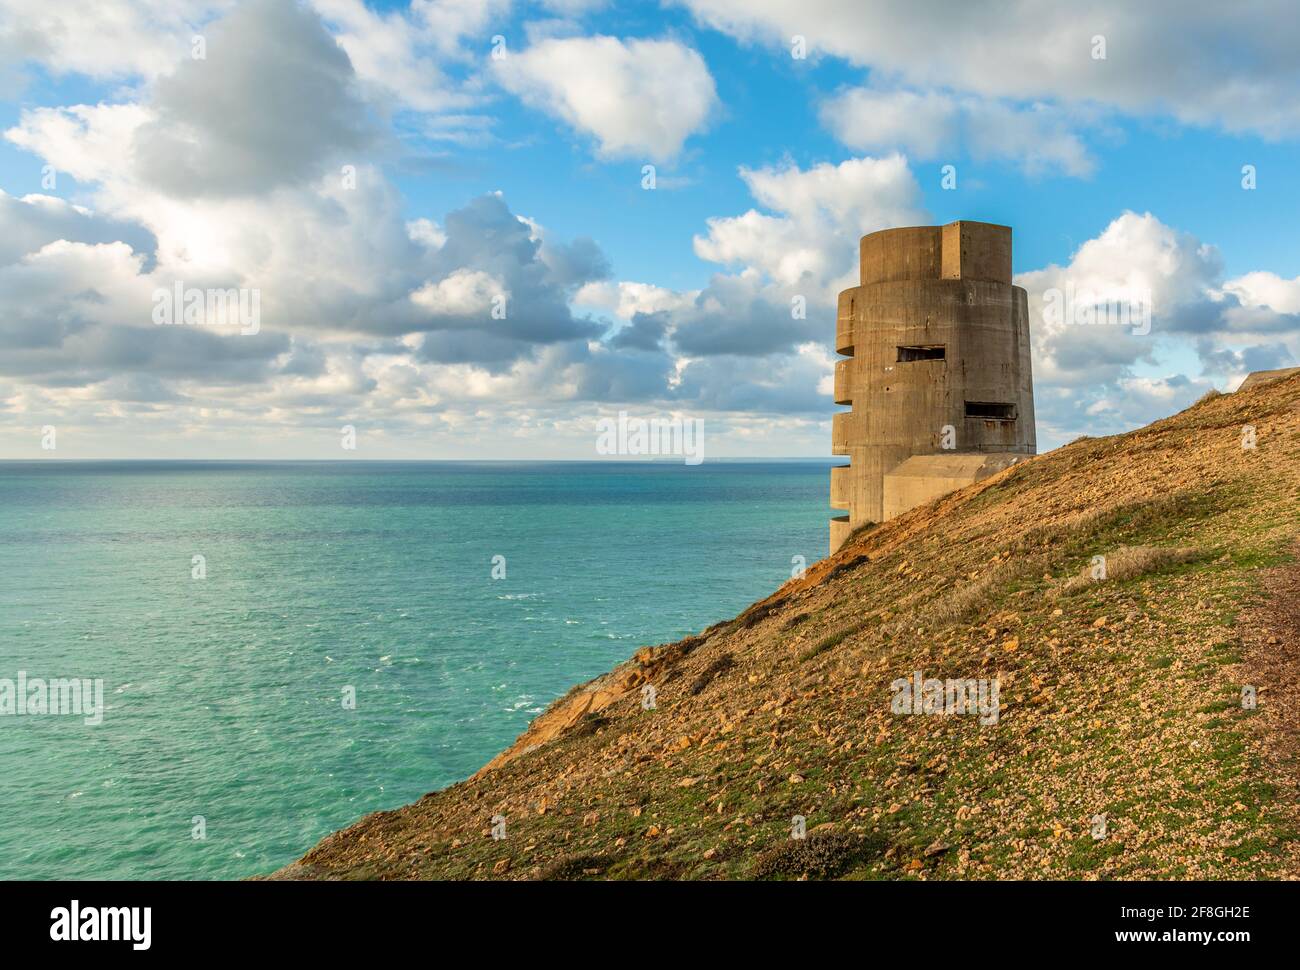 WWII concrete nazi naval tower on the seashore, Saint Quen, bailiwick of Jersey, Channel Islands Stock Photo